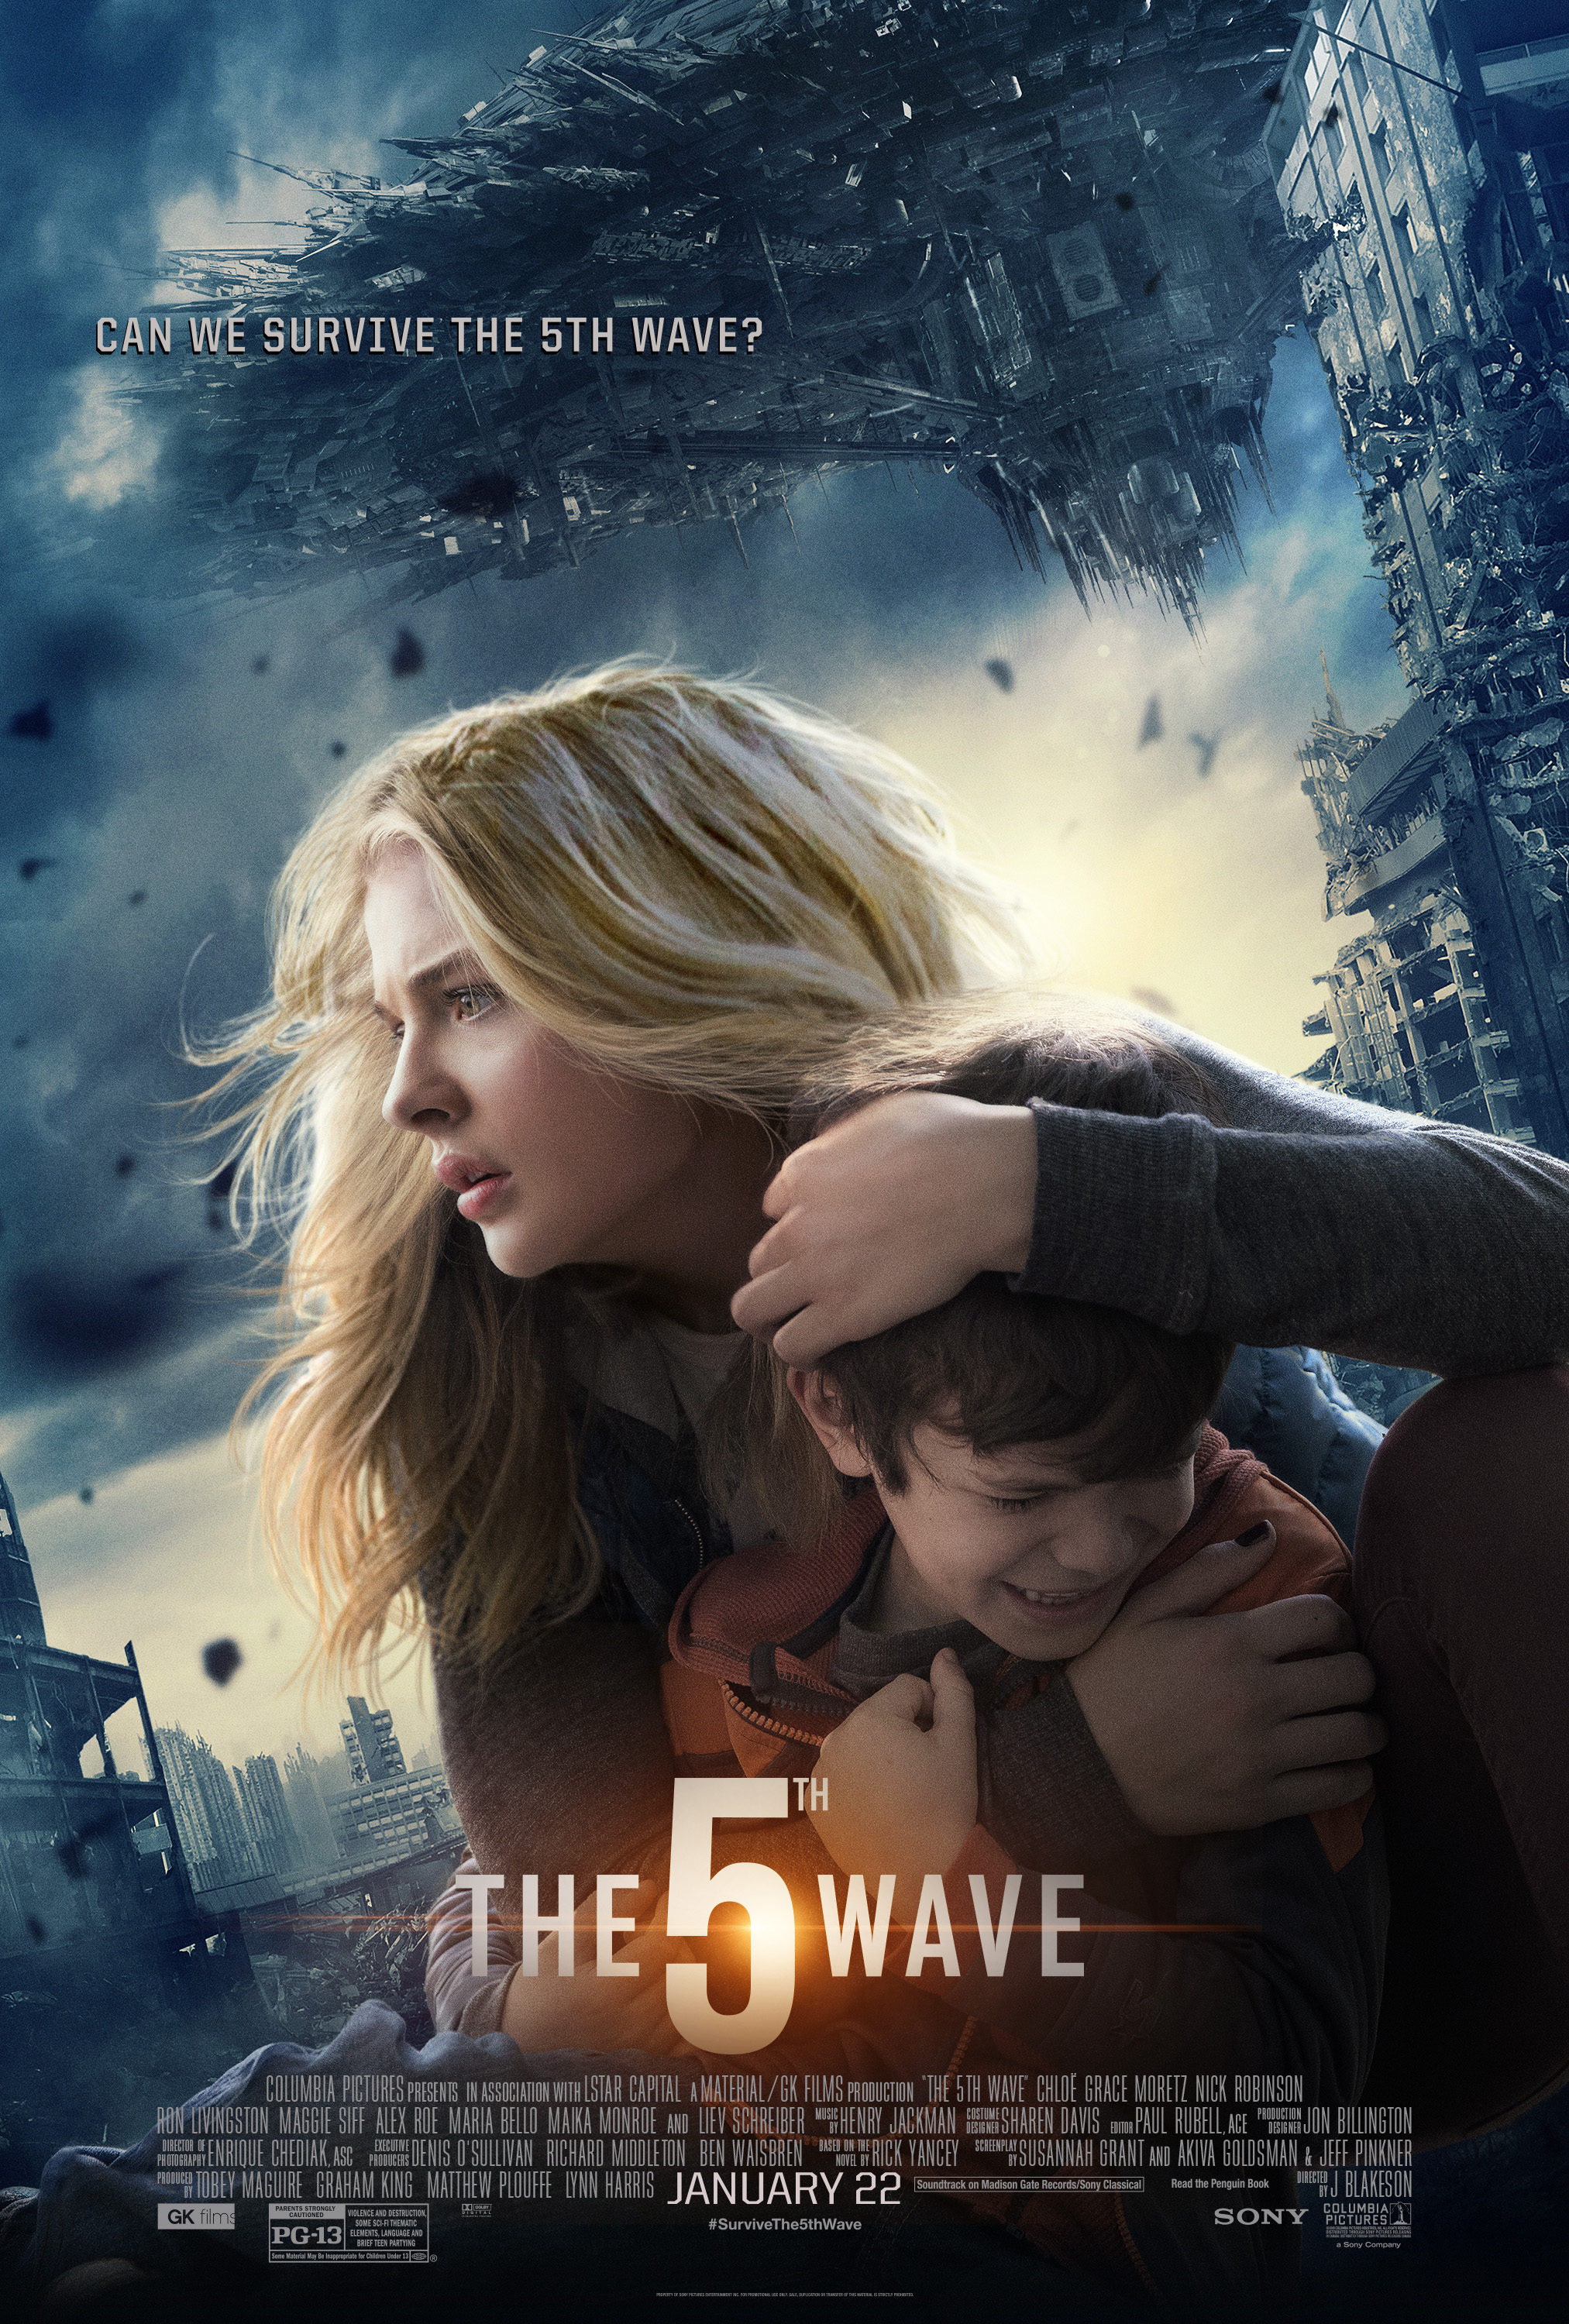 With the human race at the risk of getting wiped out owing to an alien invasion, Cassie, one of the few survivors, decides to risk everything to find her younger brother, Sam.